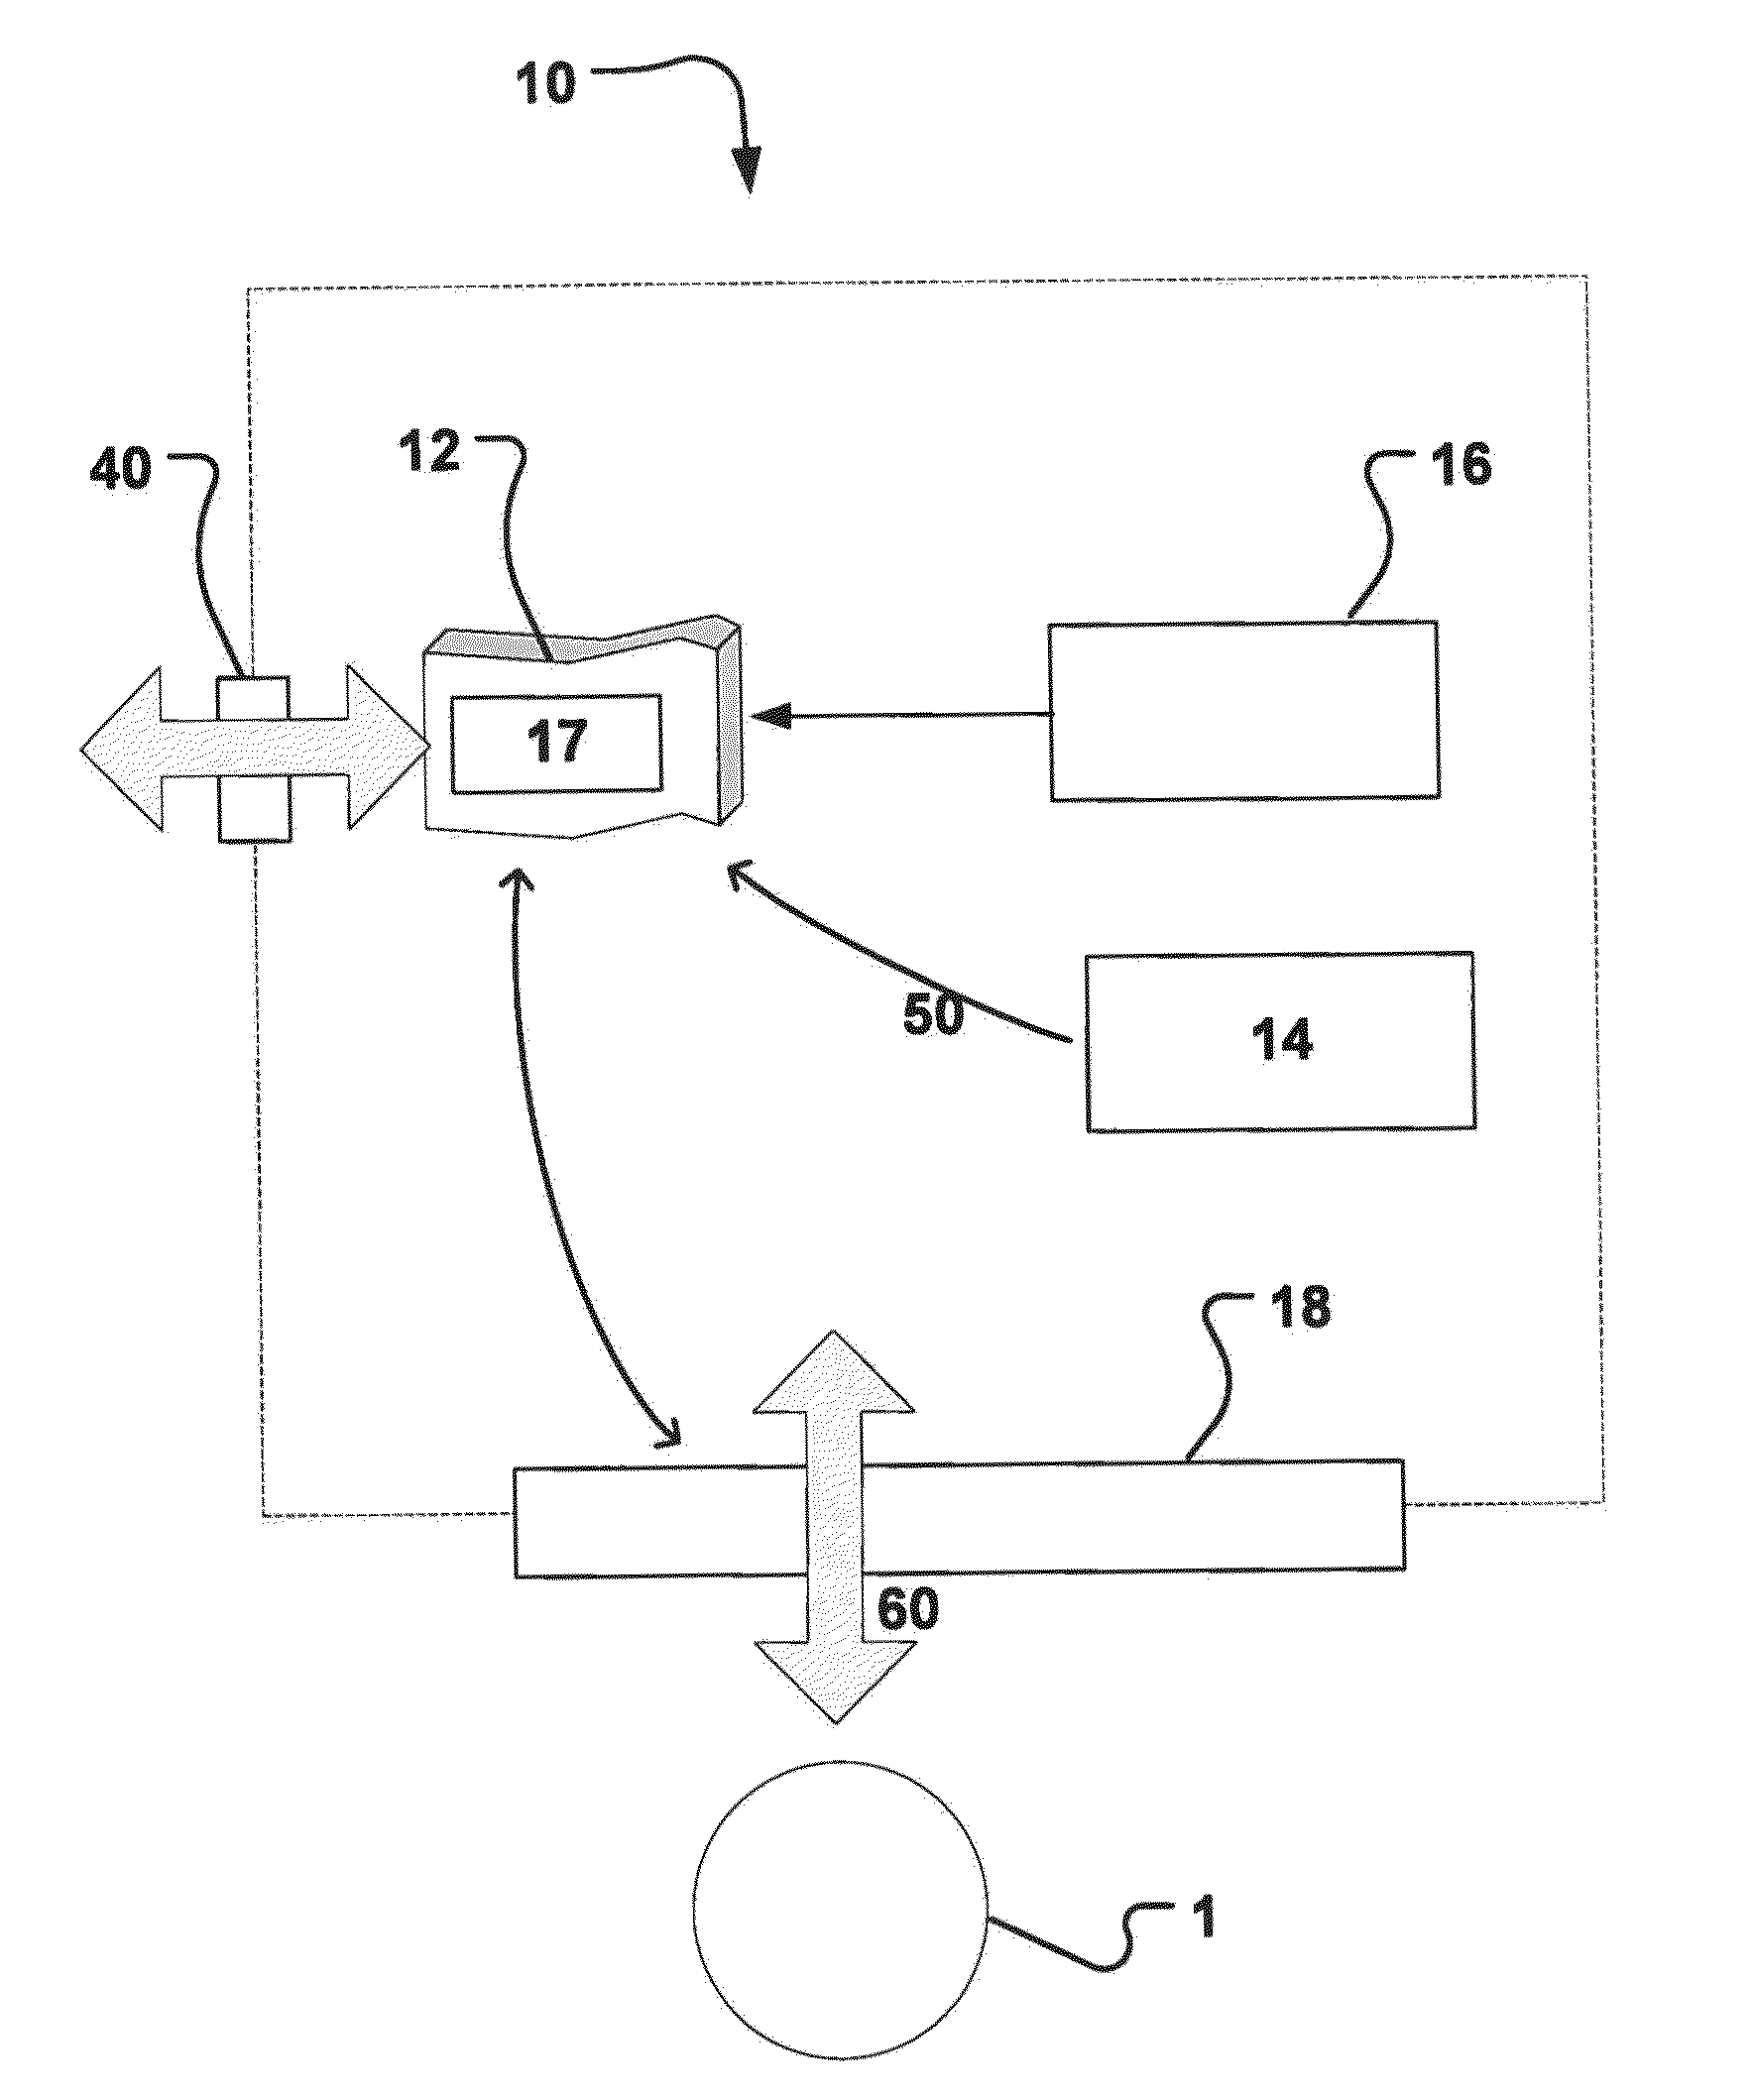 Patient management device, system and method